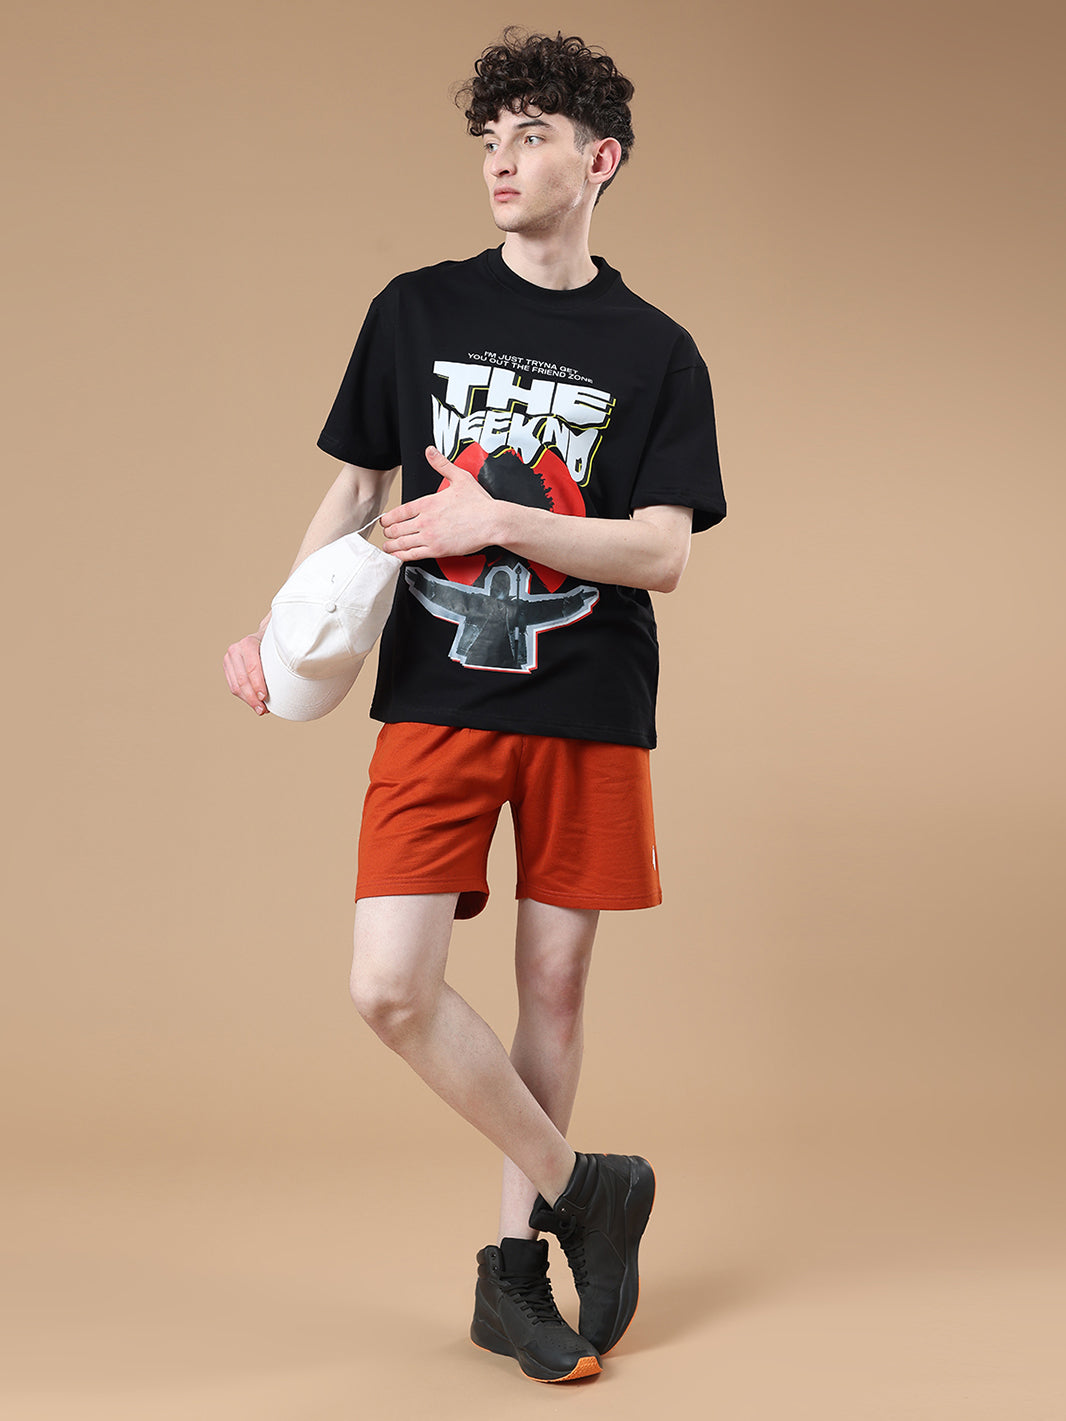 The Weekend Graphic Printed Men's Heavy Gauge Oversized Fit T-shirt